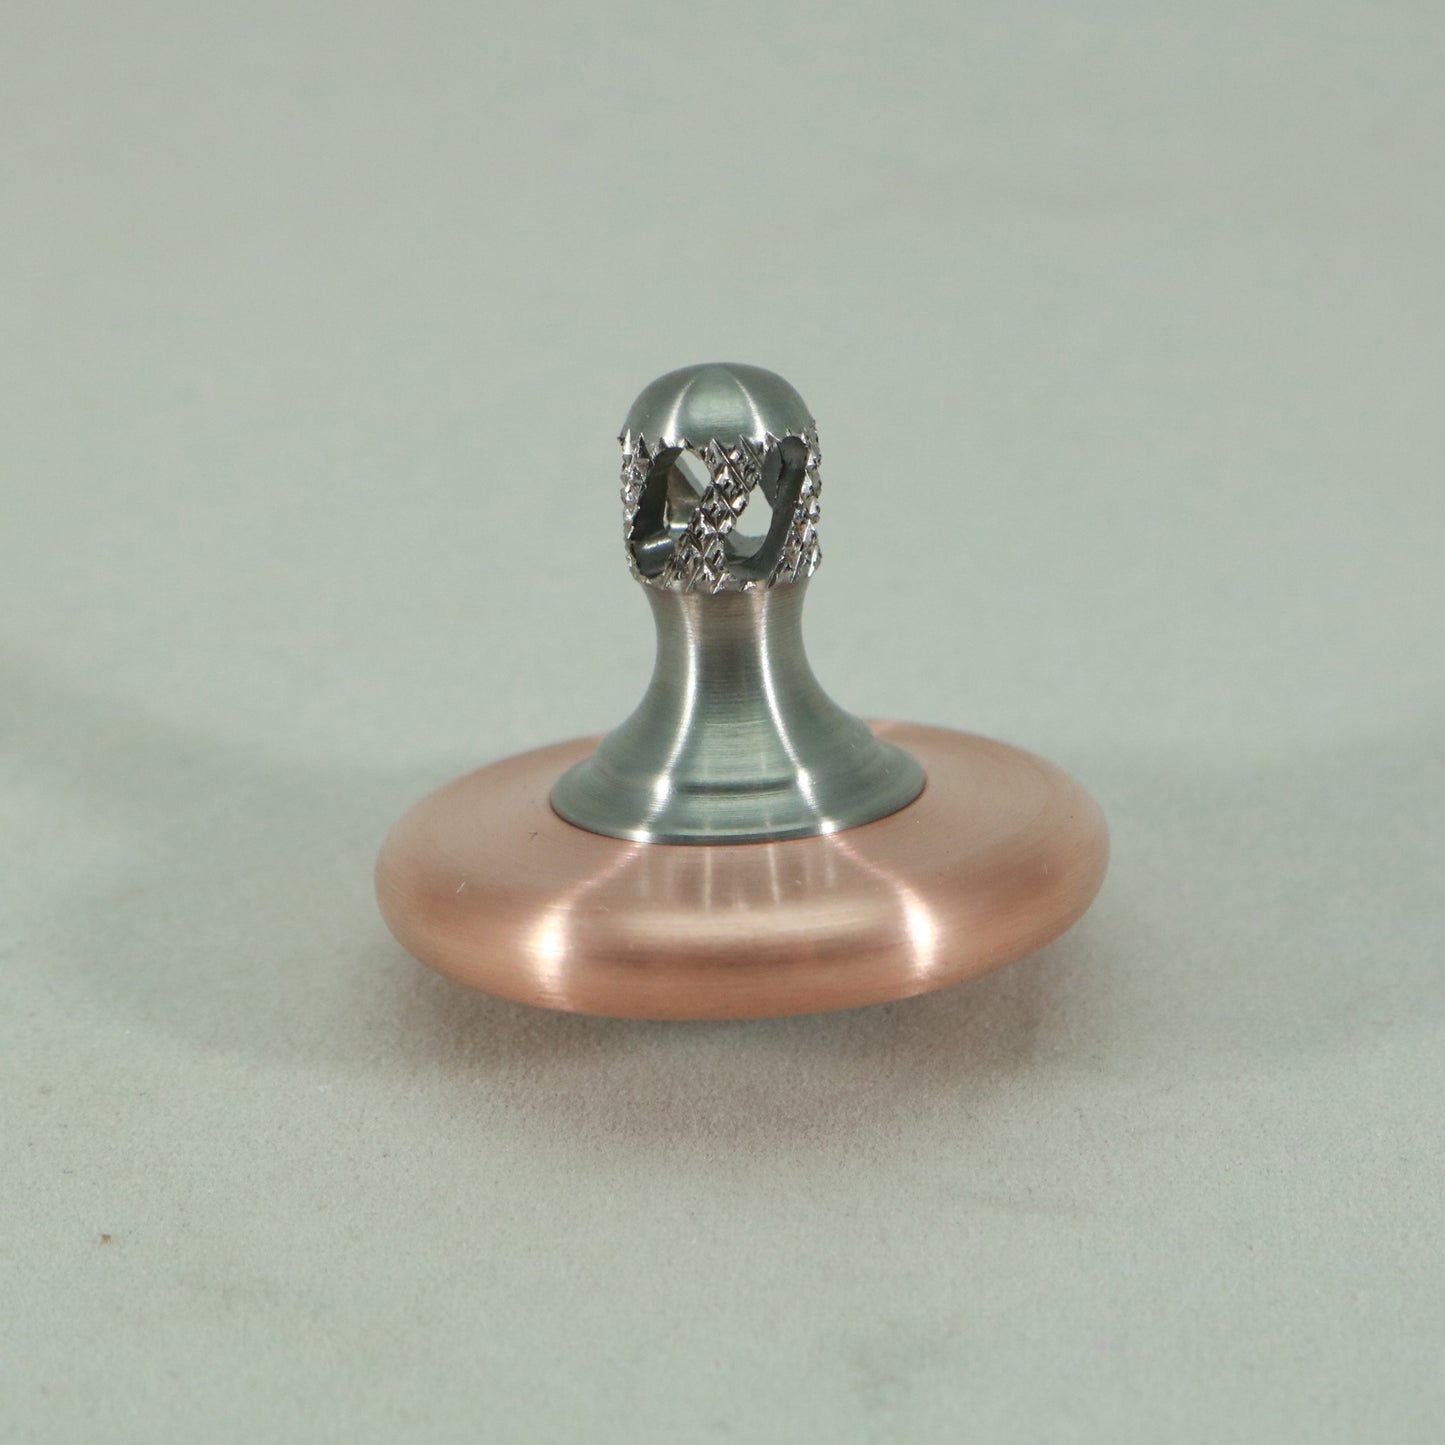 M3 - Brushed Copper & Stainless Steel Spin Top SG